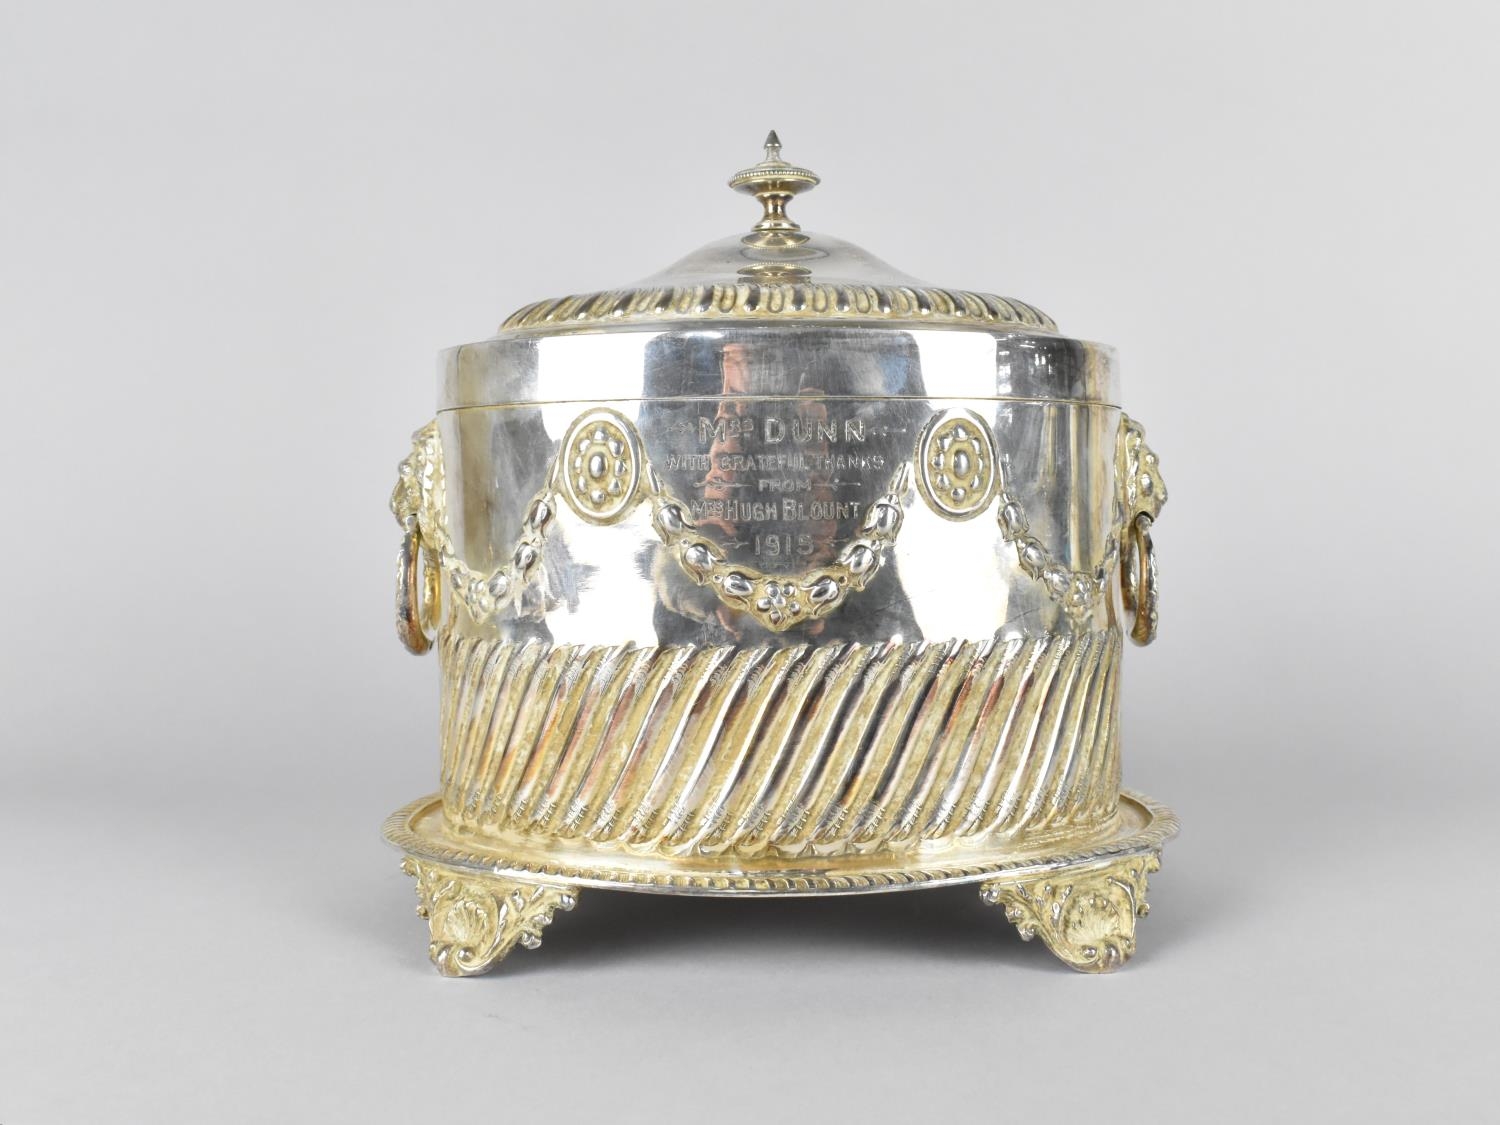 An Early 20th Century Silver Plated Presentation Biscuit Barrel of Oval Form, the Body with Lion - Image 2 of 3